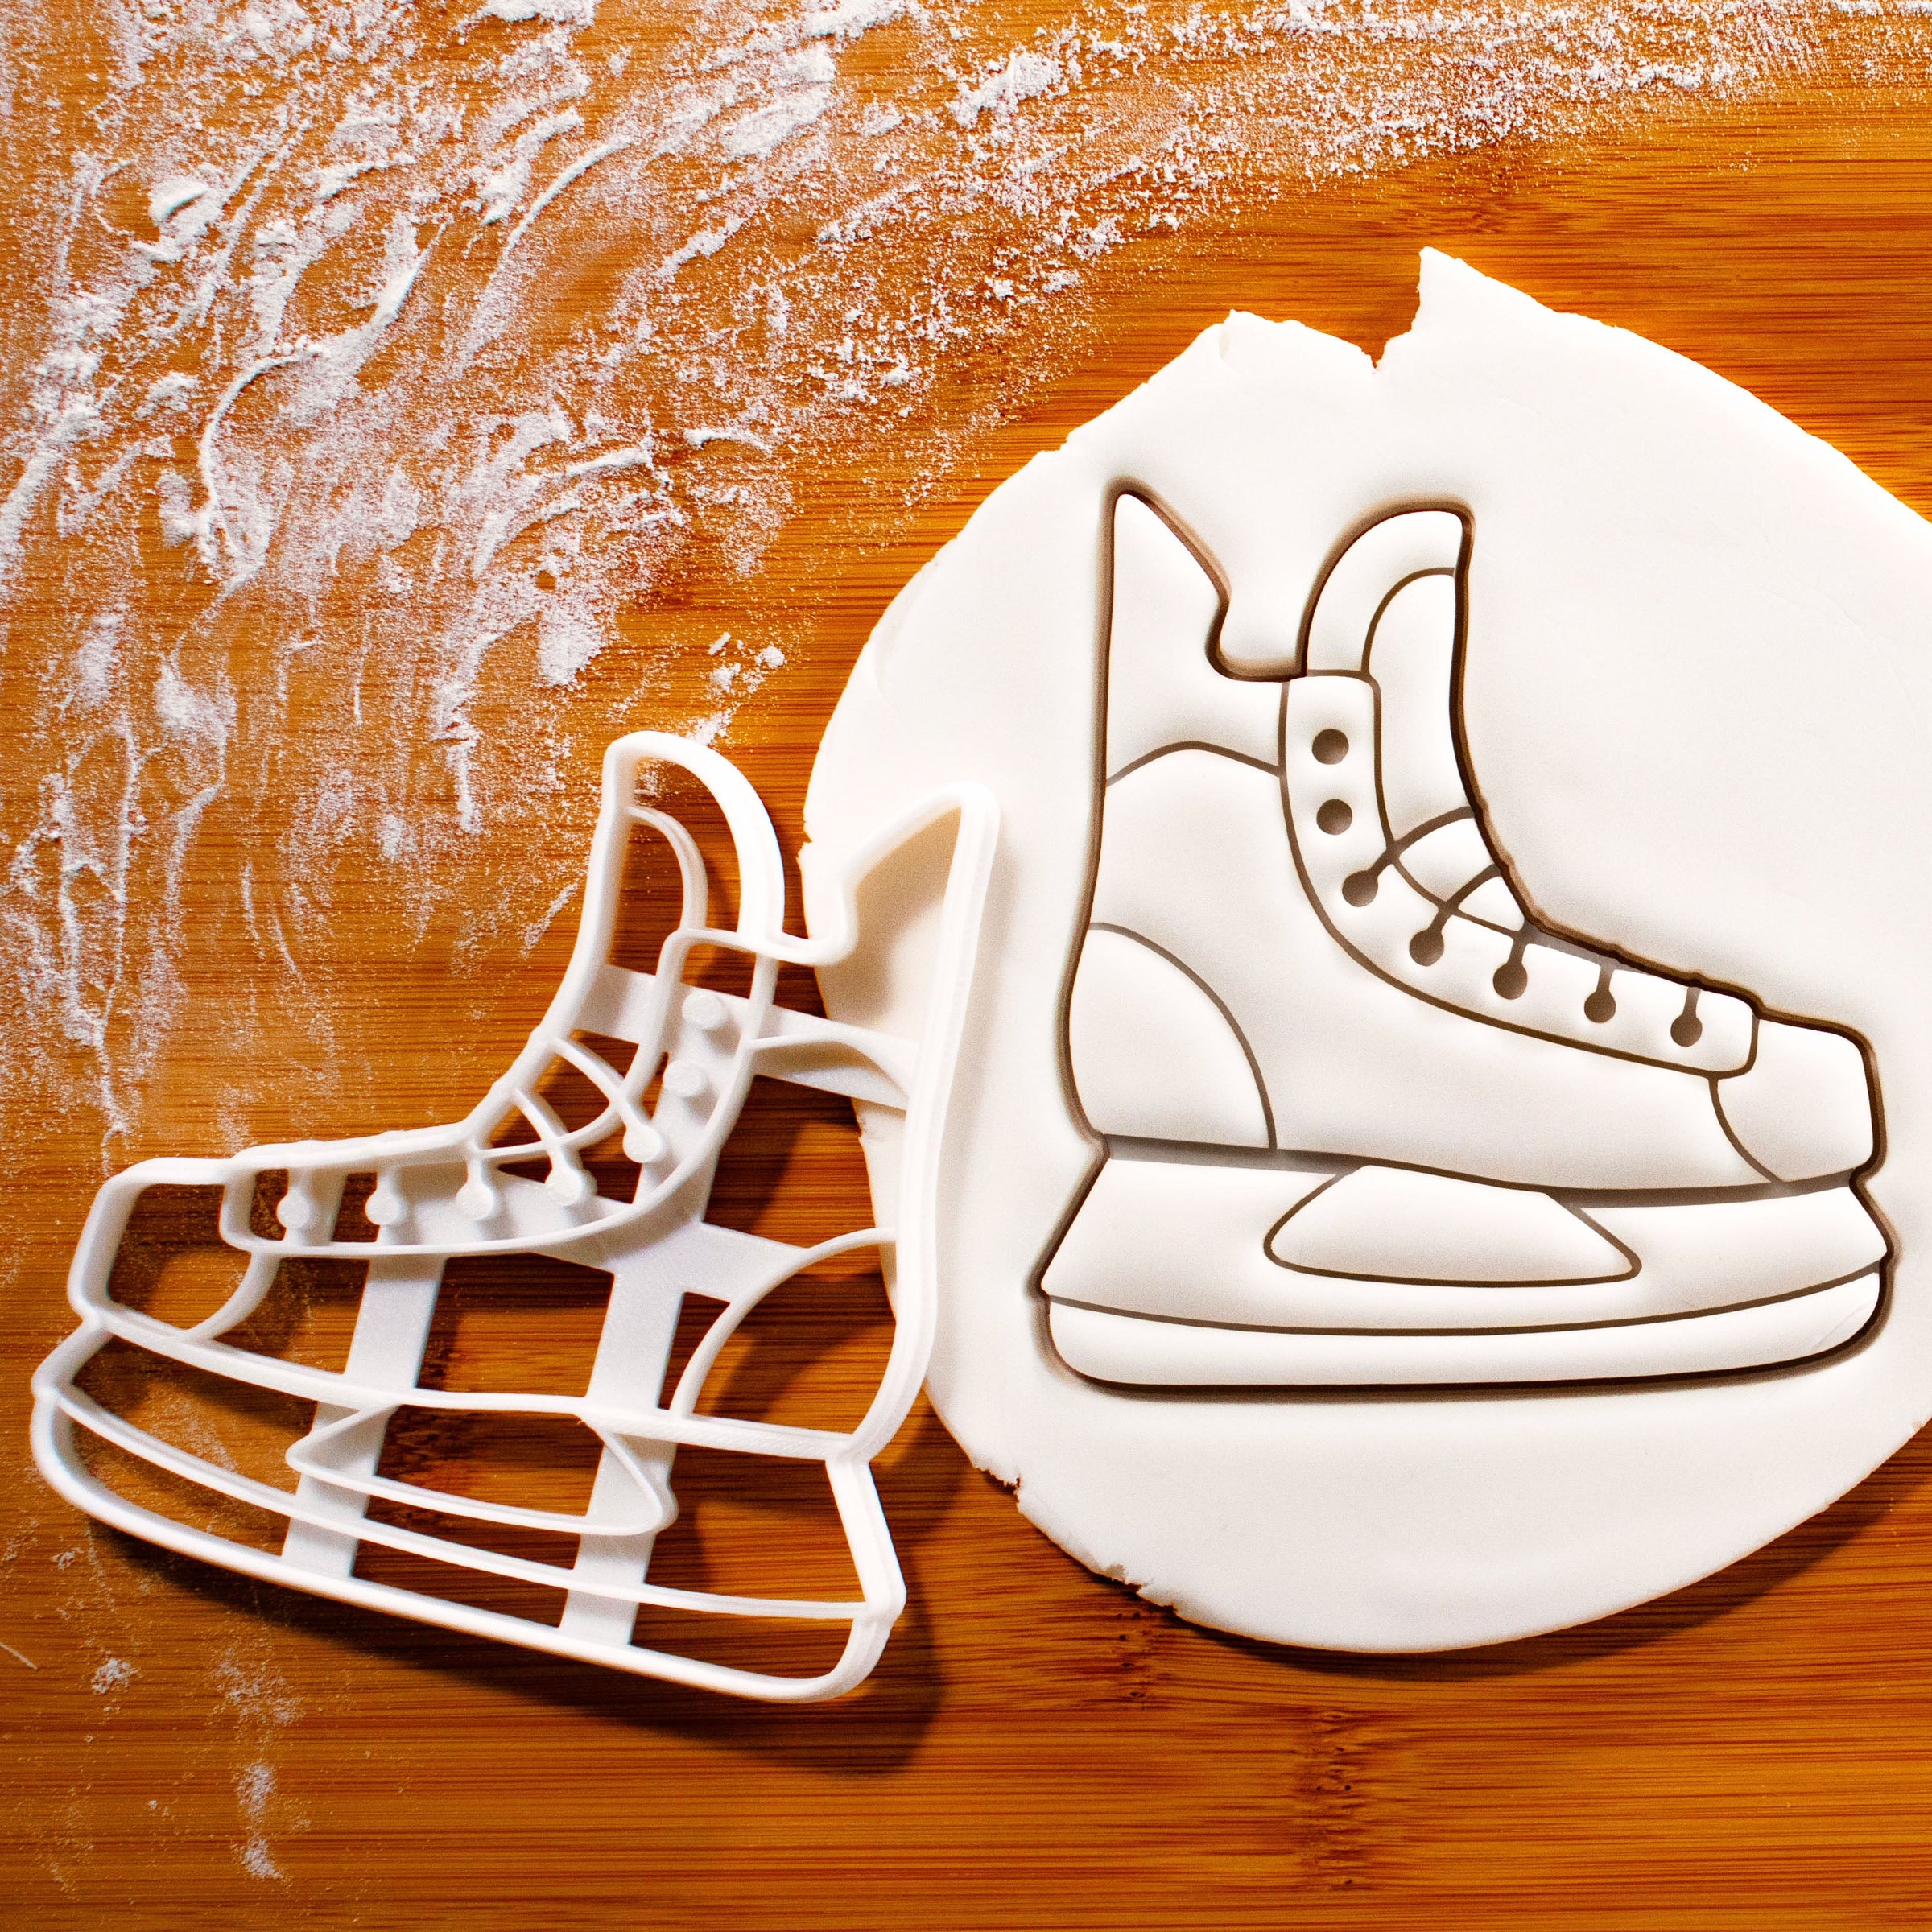 Figure Skating And Hockey Themed Embellishments: On The Ice